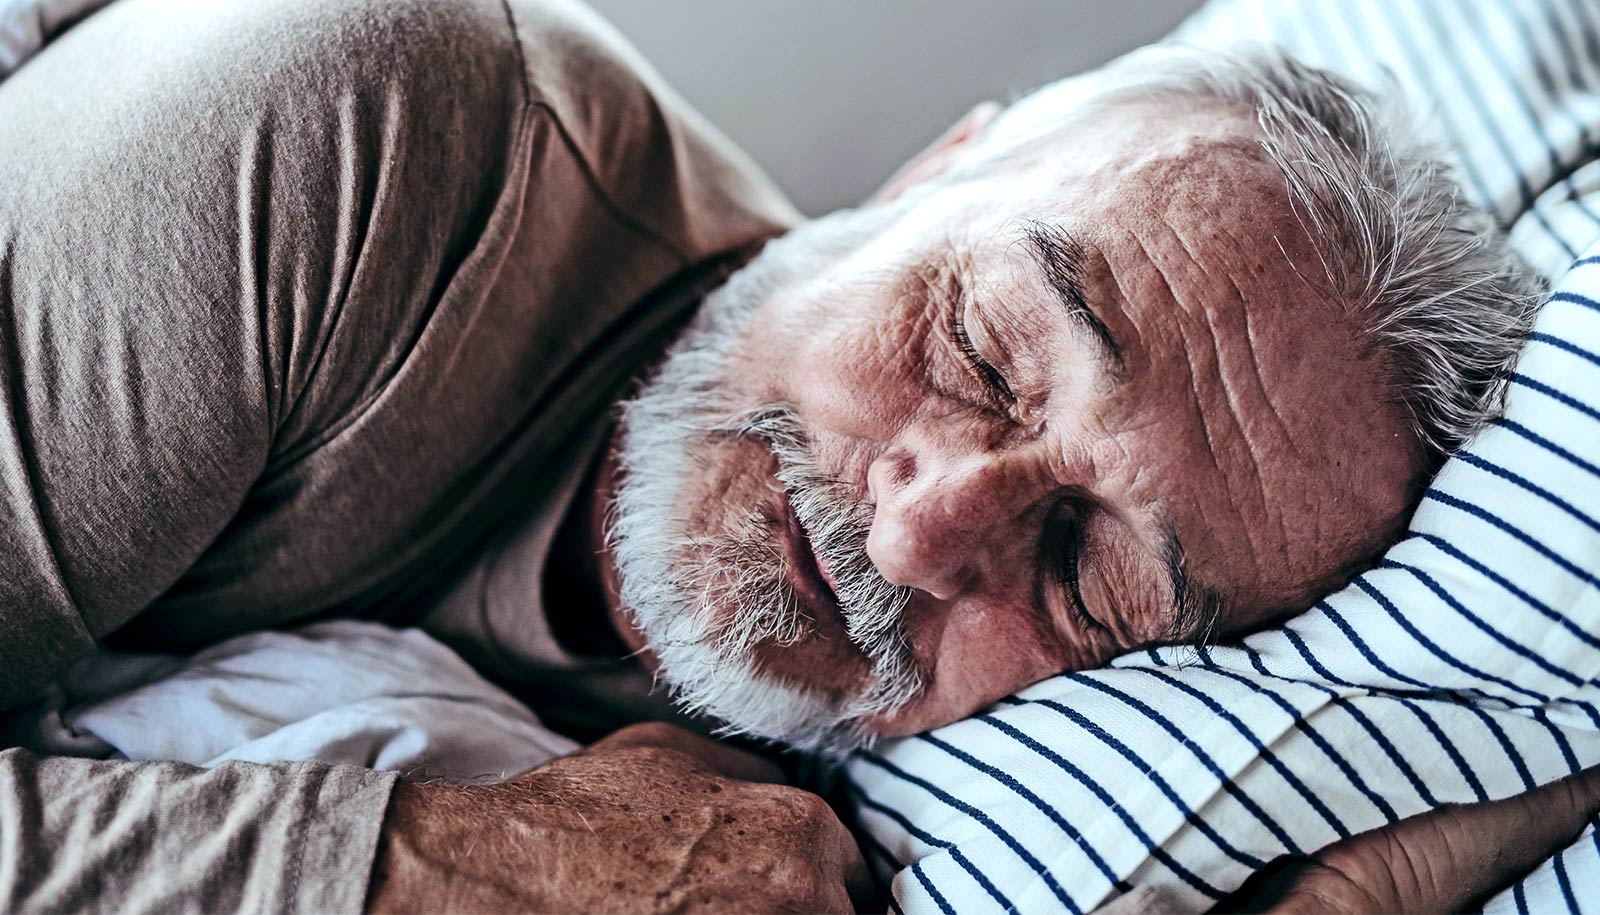 An older man with a white beard sleeps soundly in bed.